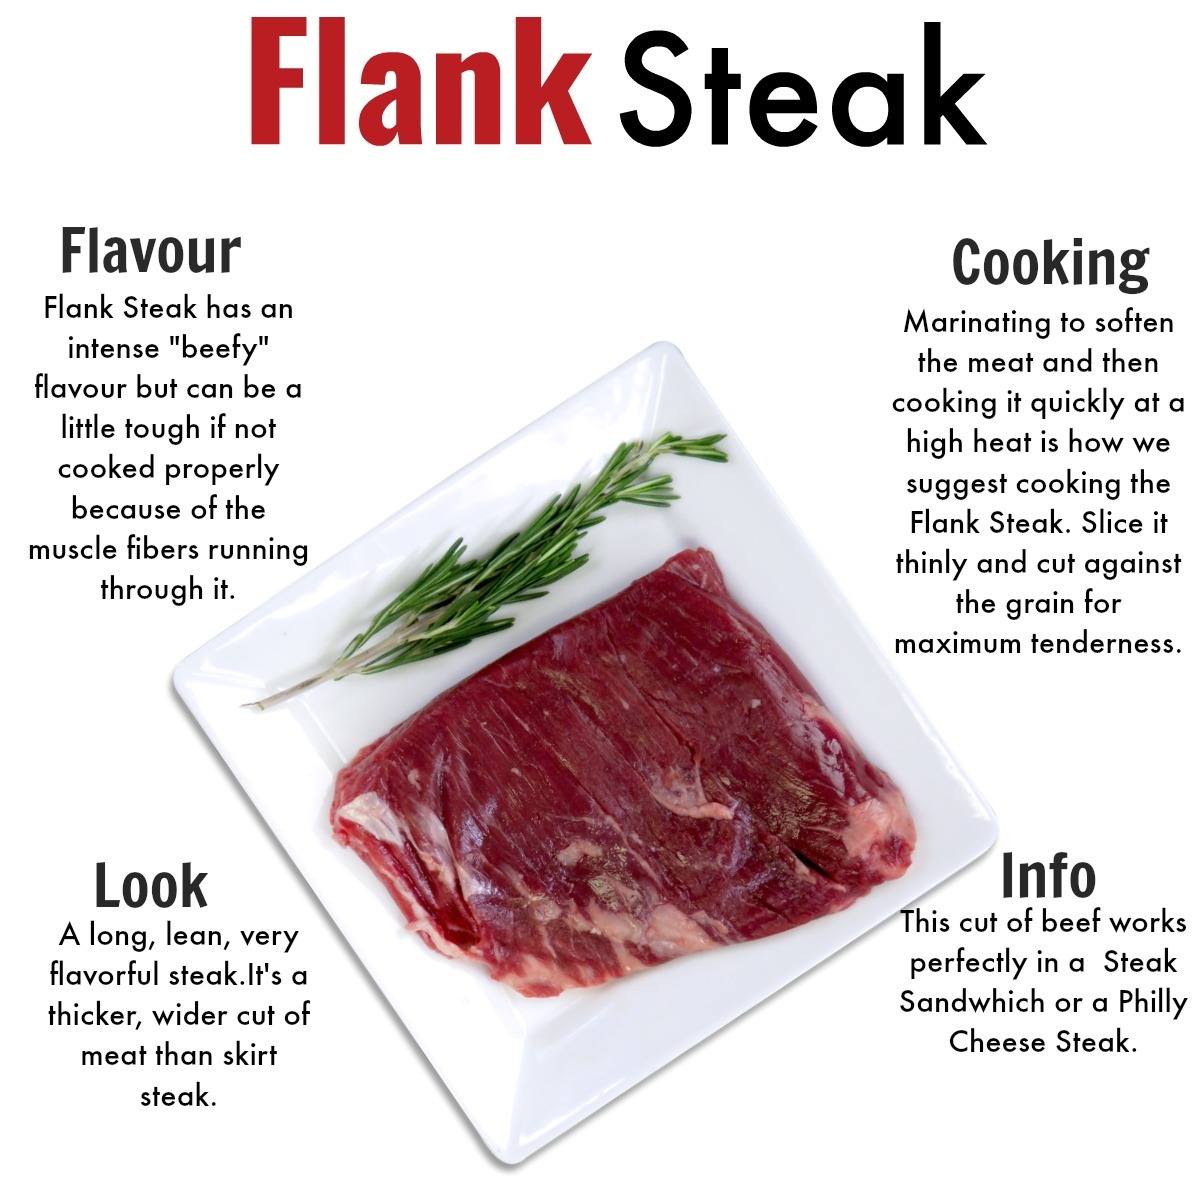 Affordable grass-fed beef delivery near me, steaks, ground beef and more - Nutrafams - Flank Steak 2